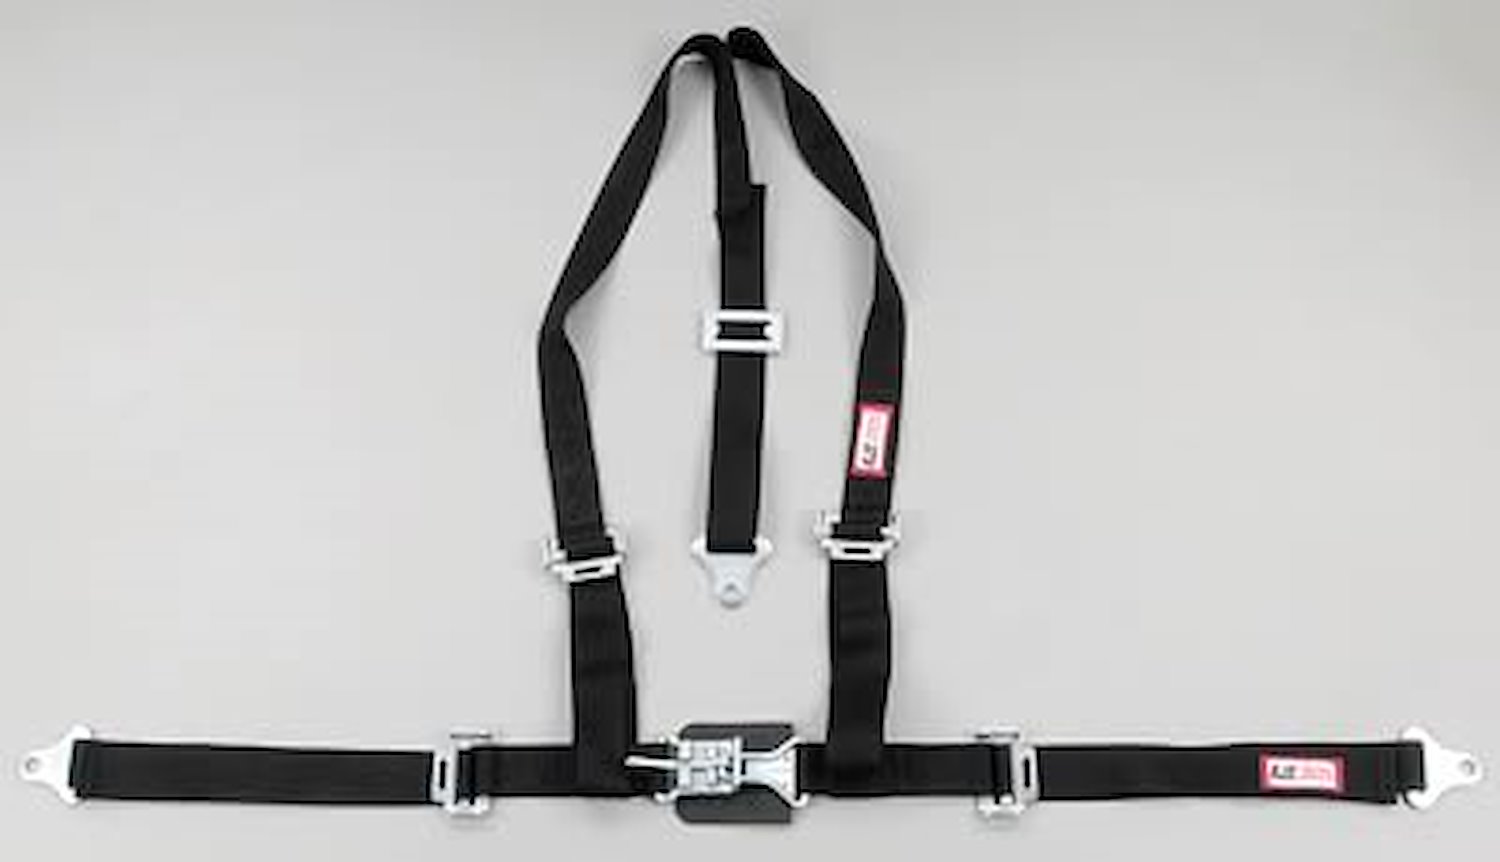 NON-SFI L&L HARNESS 3 PULL DOWN Lap Belt w/adjuster 2 S.H. V ROLL BAR Mount ALL WRAP ENDS GRAY